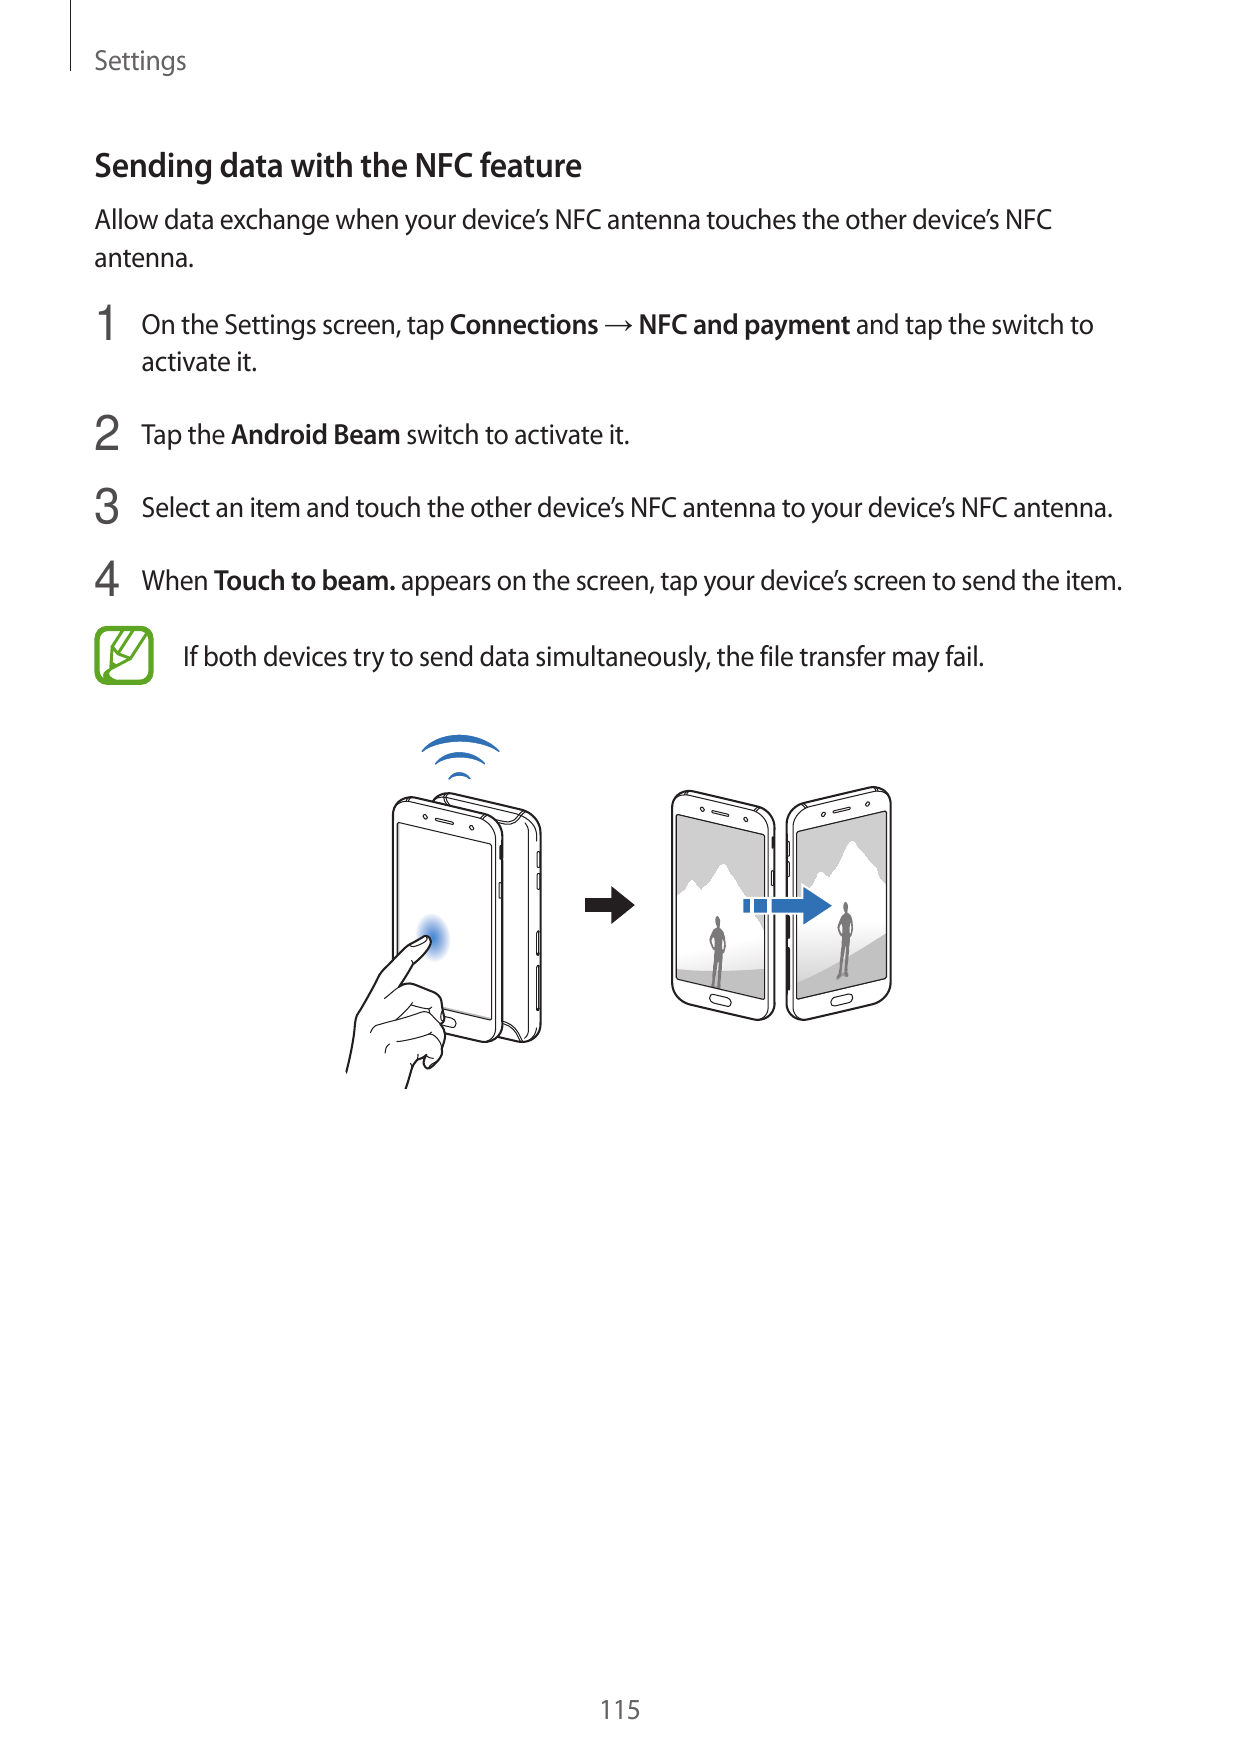 SettingsSending data with the NFC featureAllow data exchange when your device’s NFC antenna touches the other device’s NFCantenn